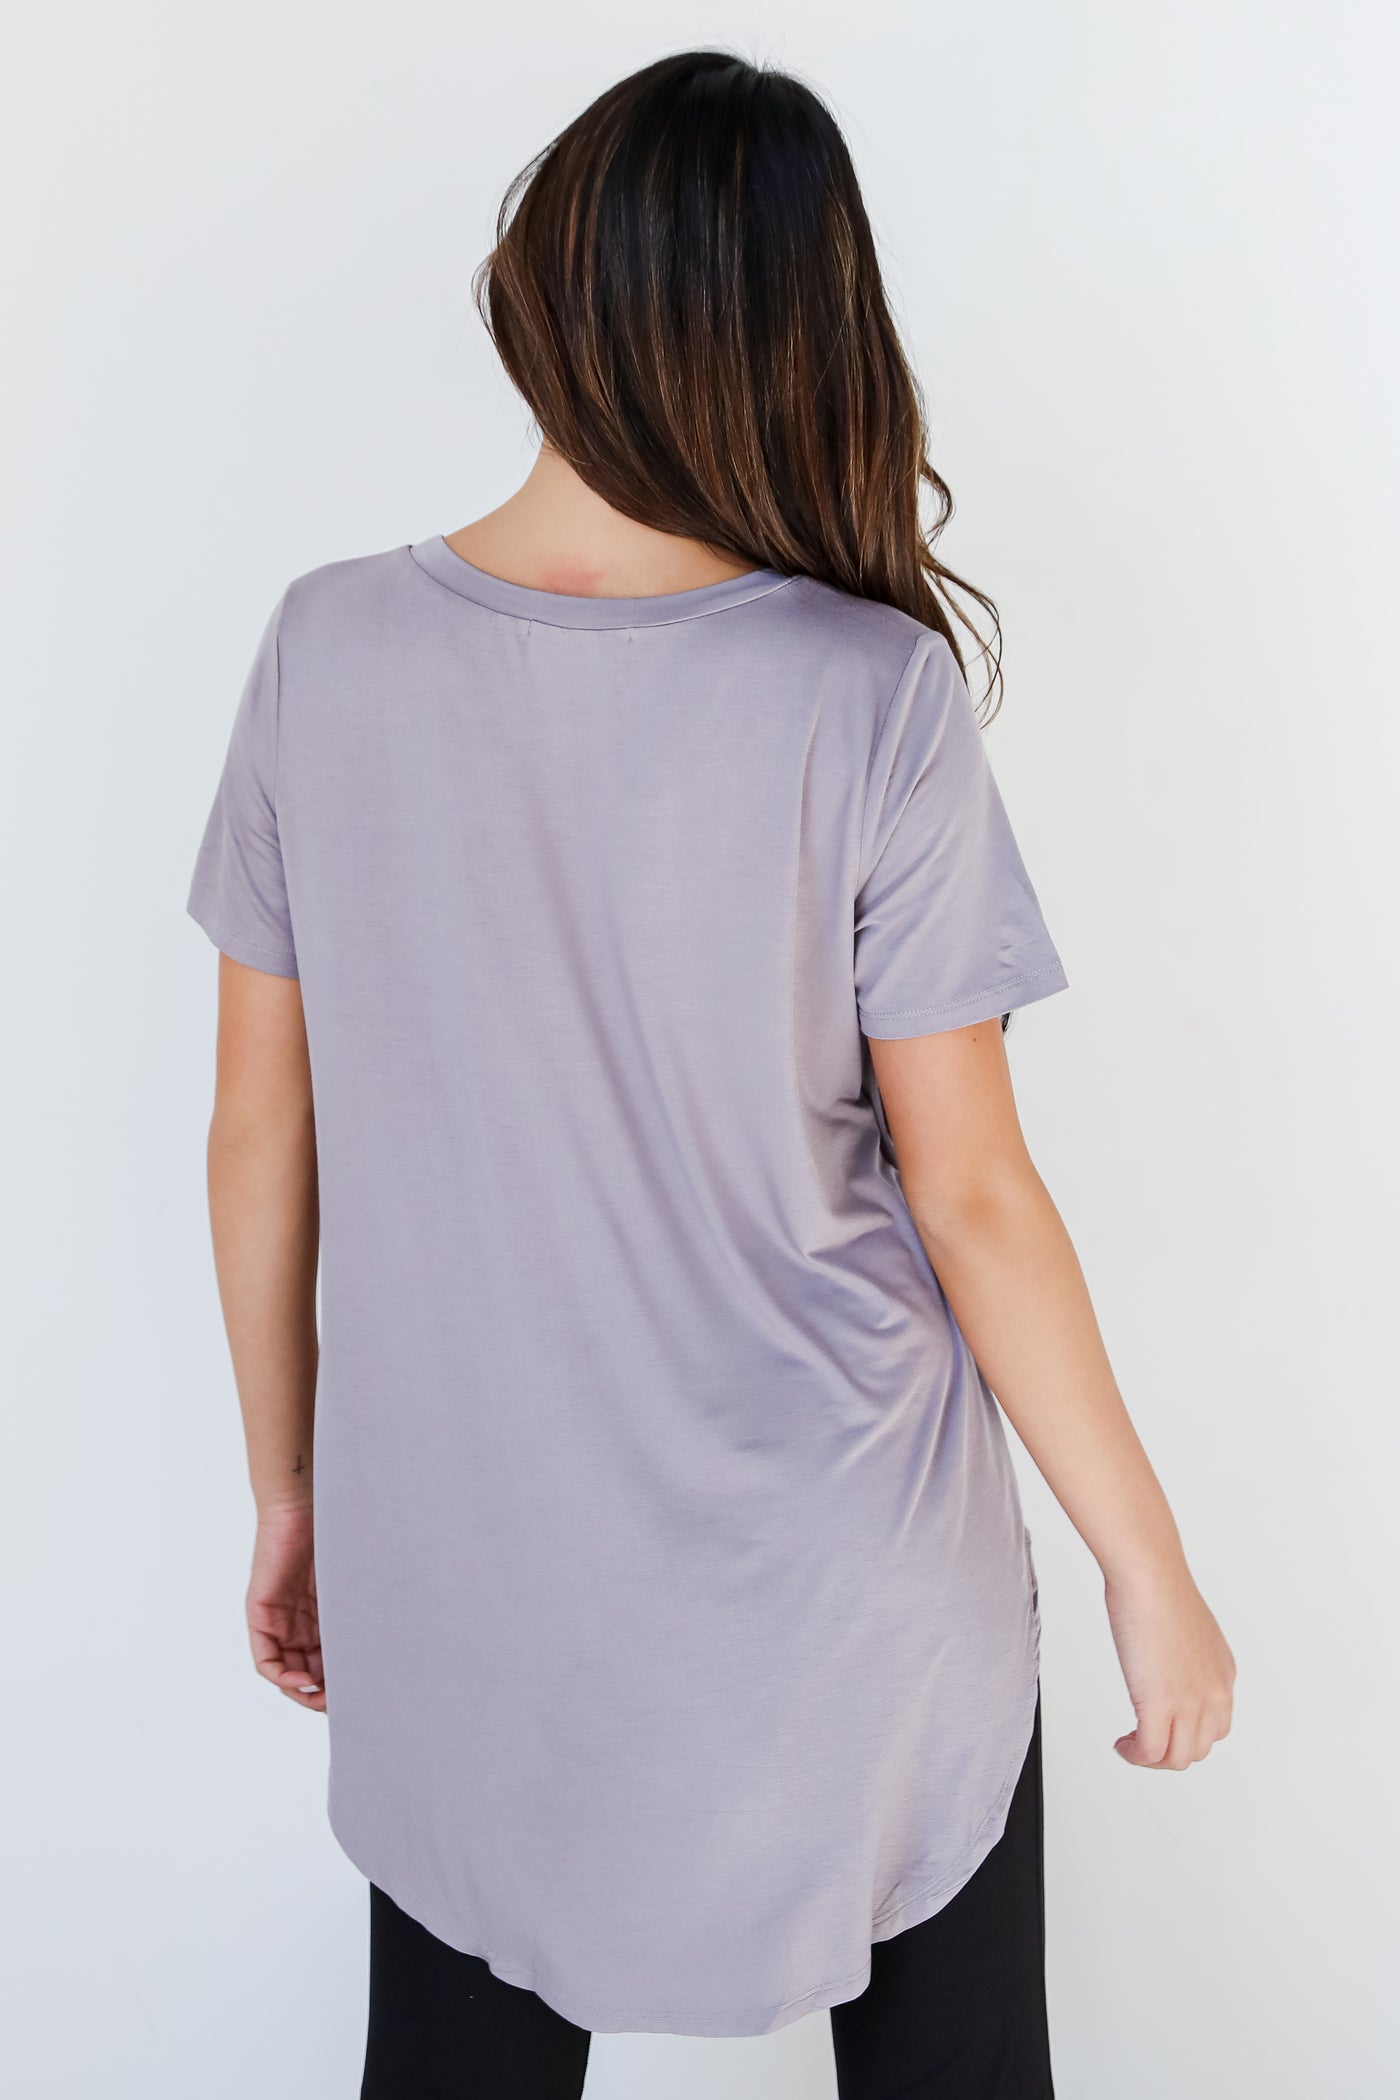 grey Everyday Tee back view